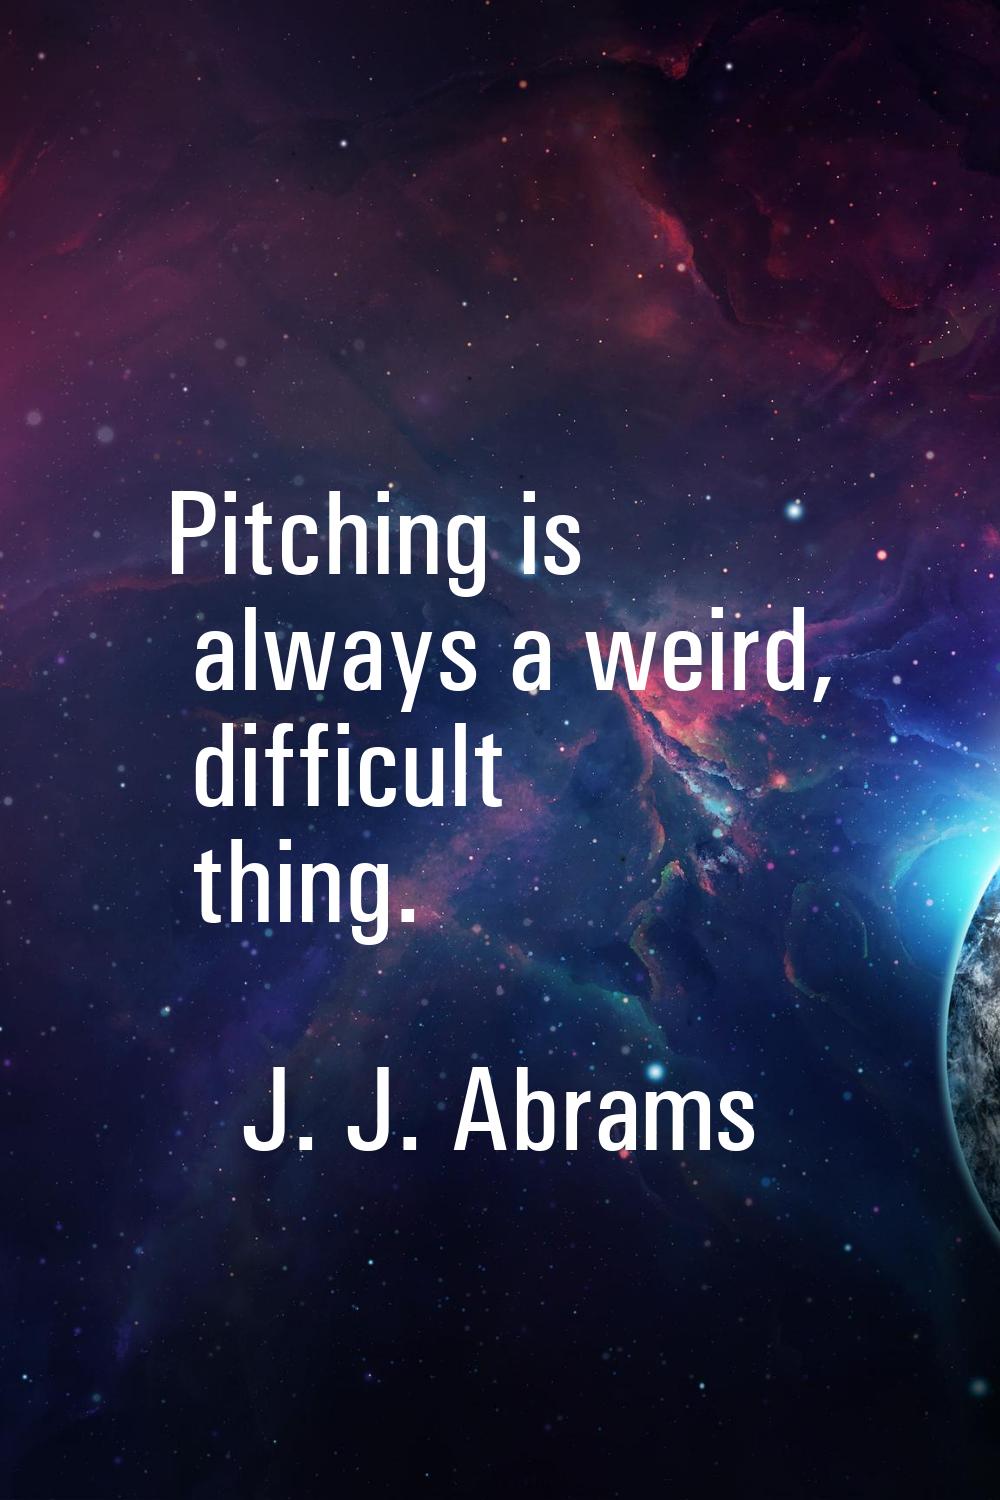 Pitching is always a weird, difficult thing.